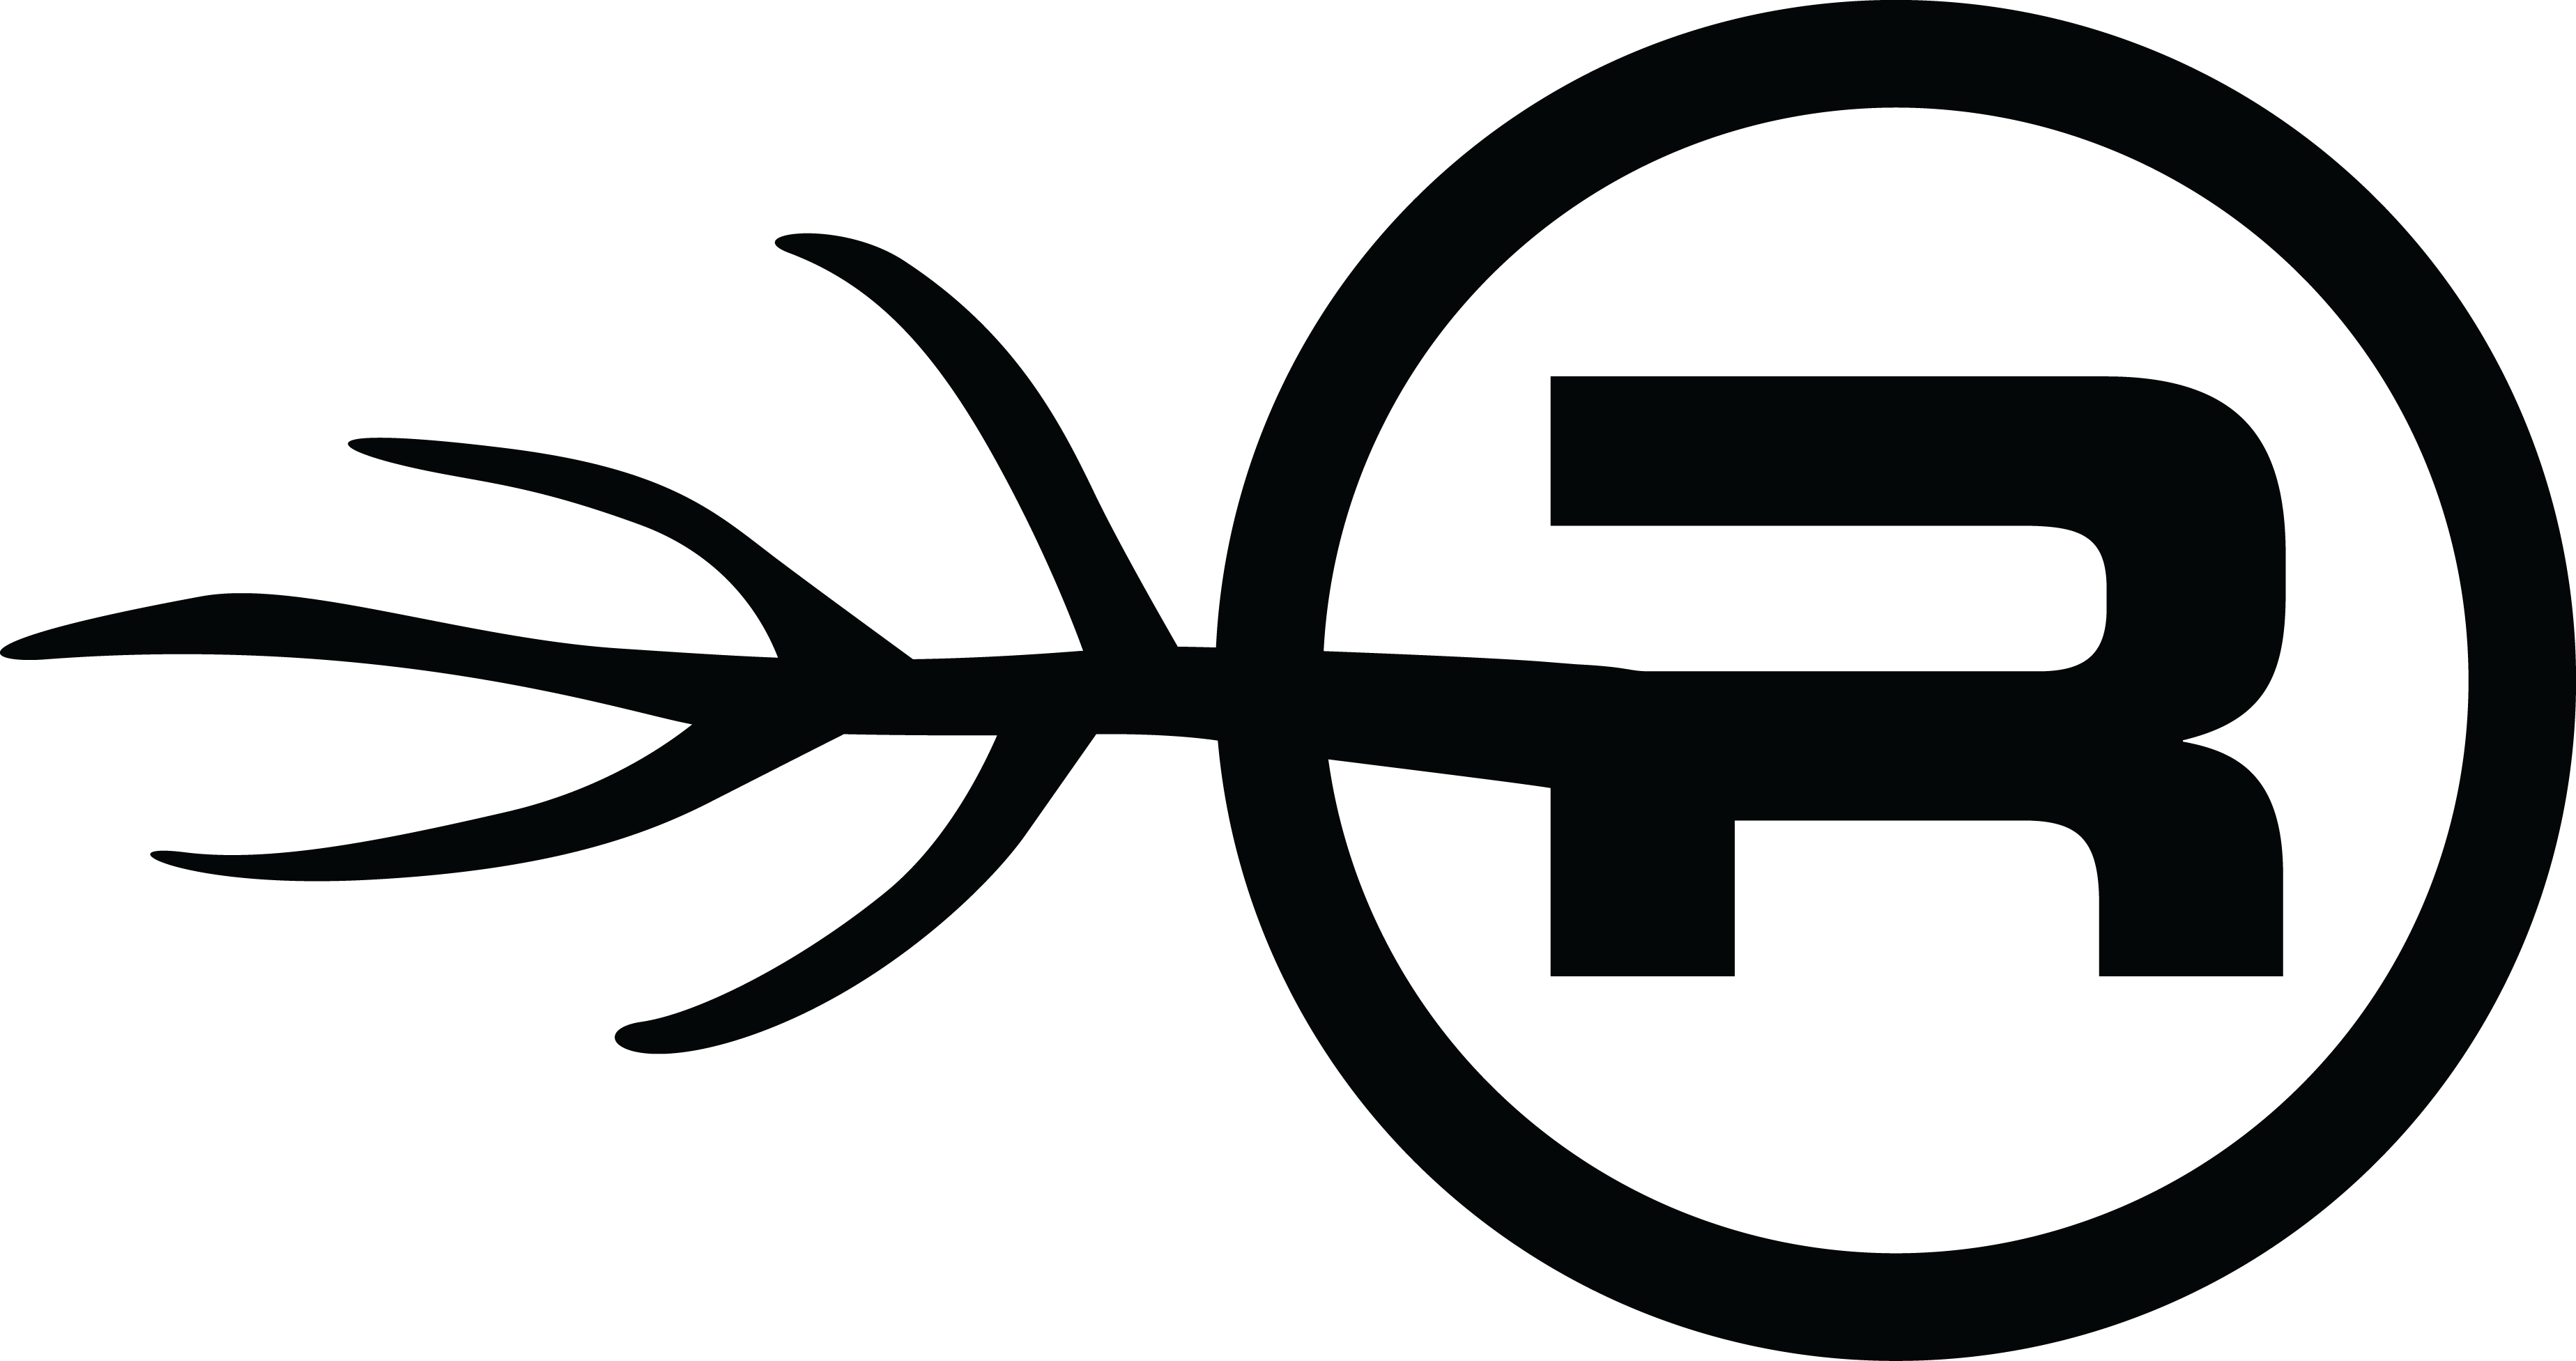 the official RCSG logo, a black letter R surrounded by a circle, with a branch coming out